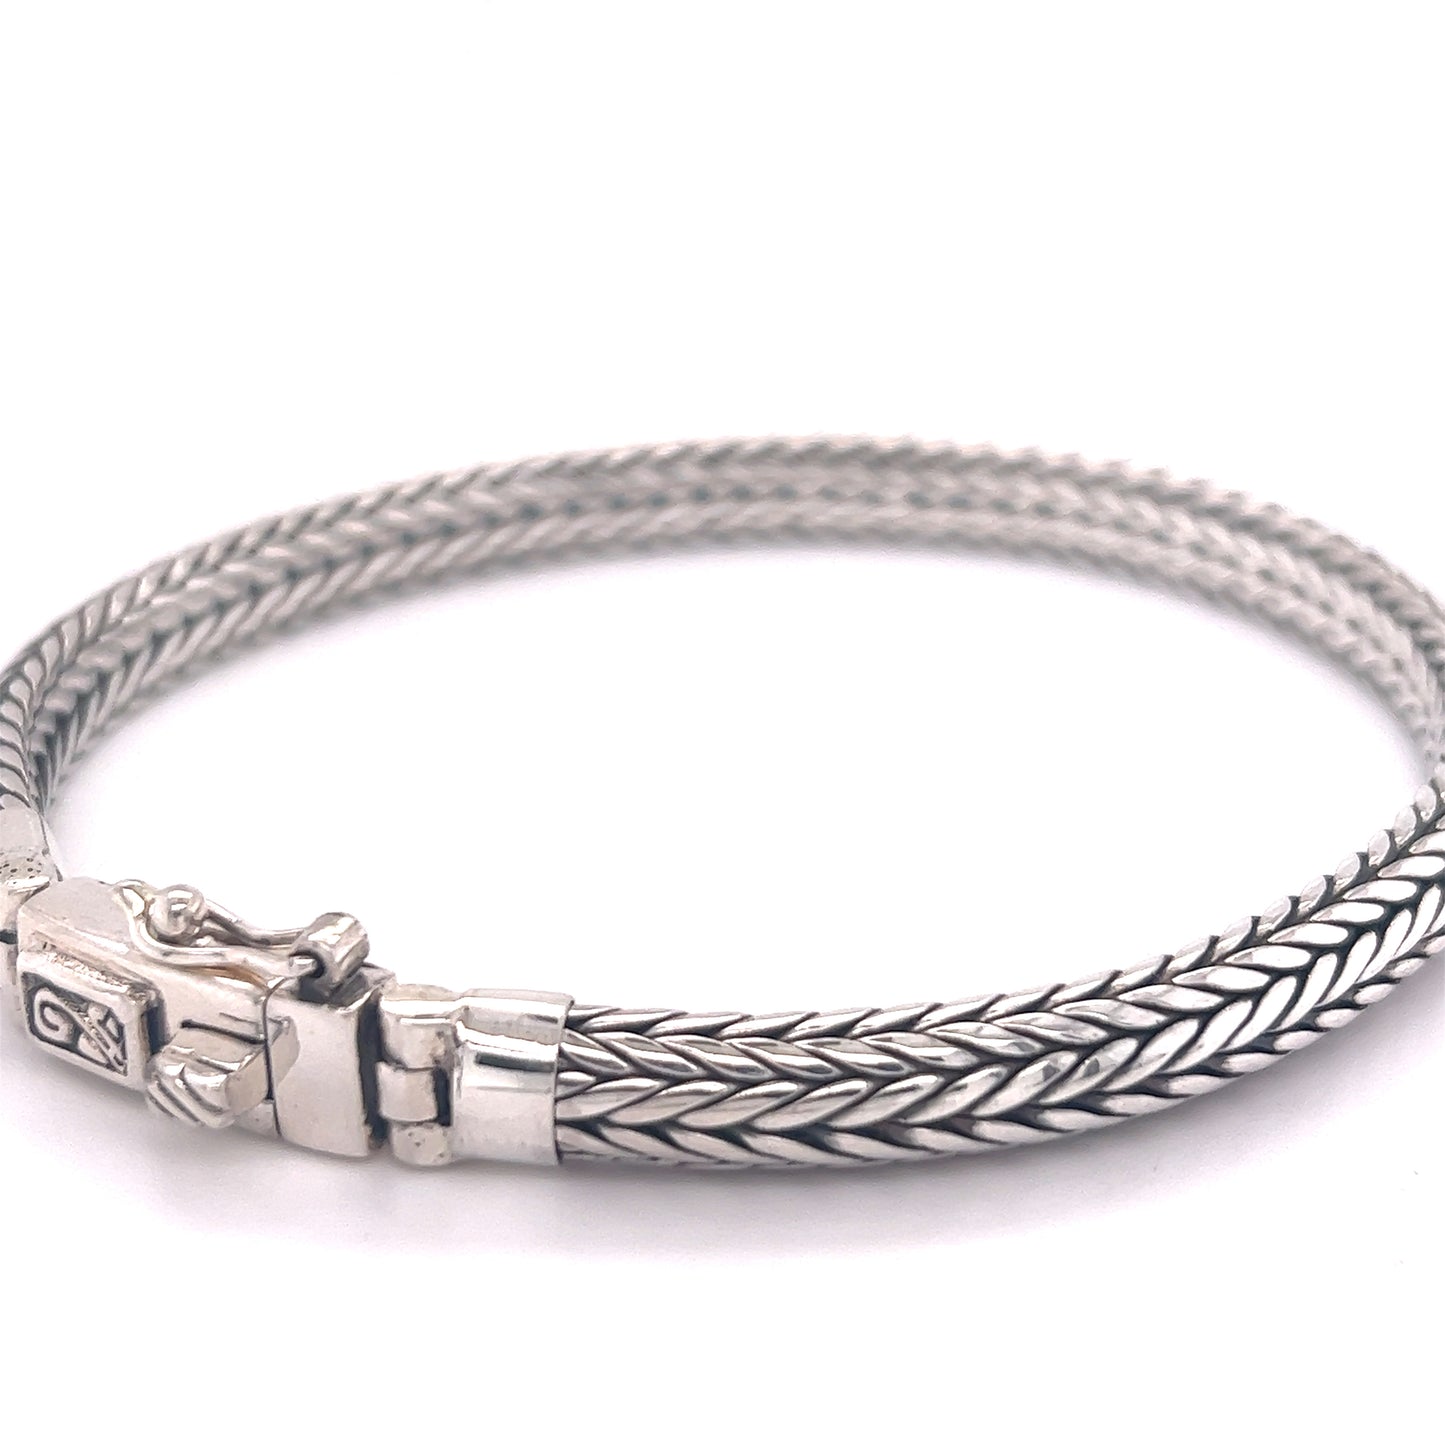 A unique Super Silver Braided Bracelet with Flat Edge, featuring a comfortable clasp.